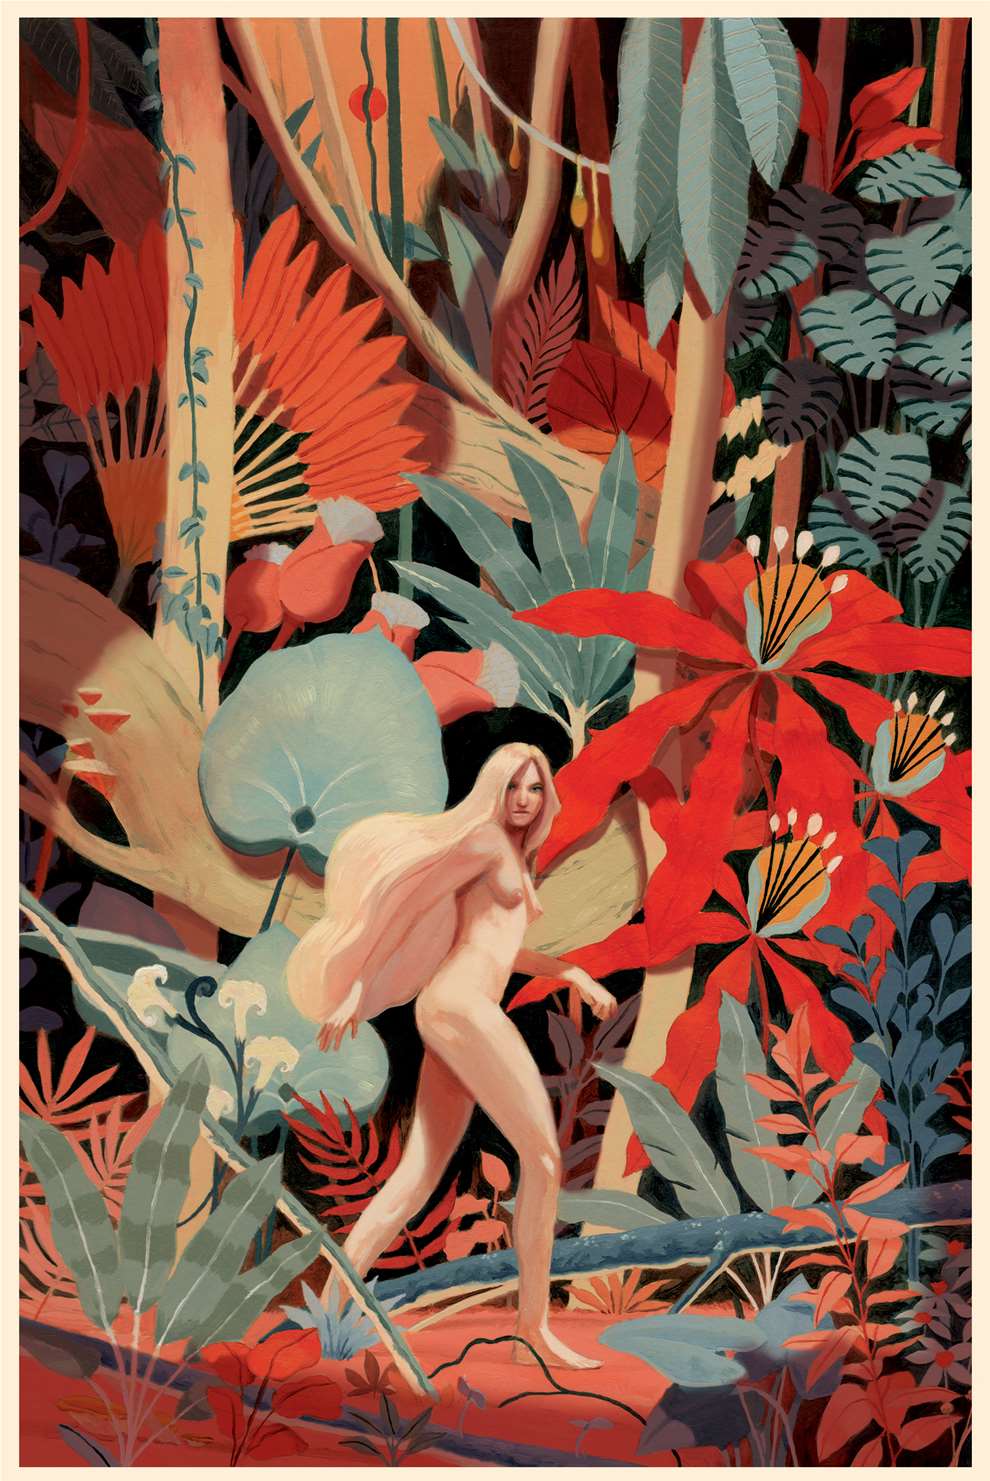 David De Las Heras, Handpainted botanical intricate scenery of a naked women in a forest, commissioned by the Folio Society as part of 'Planet of the Apes.'